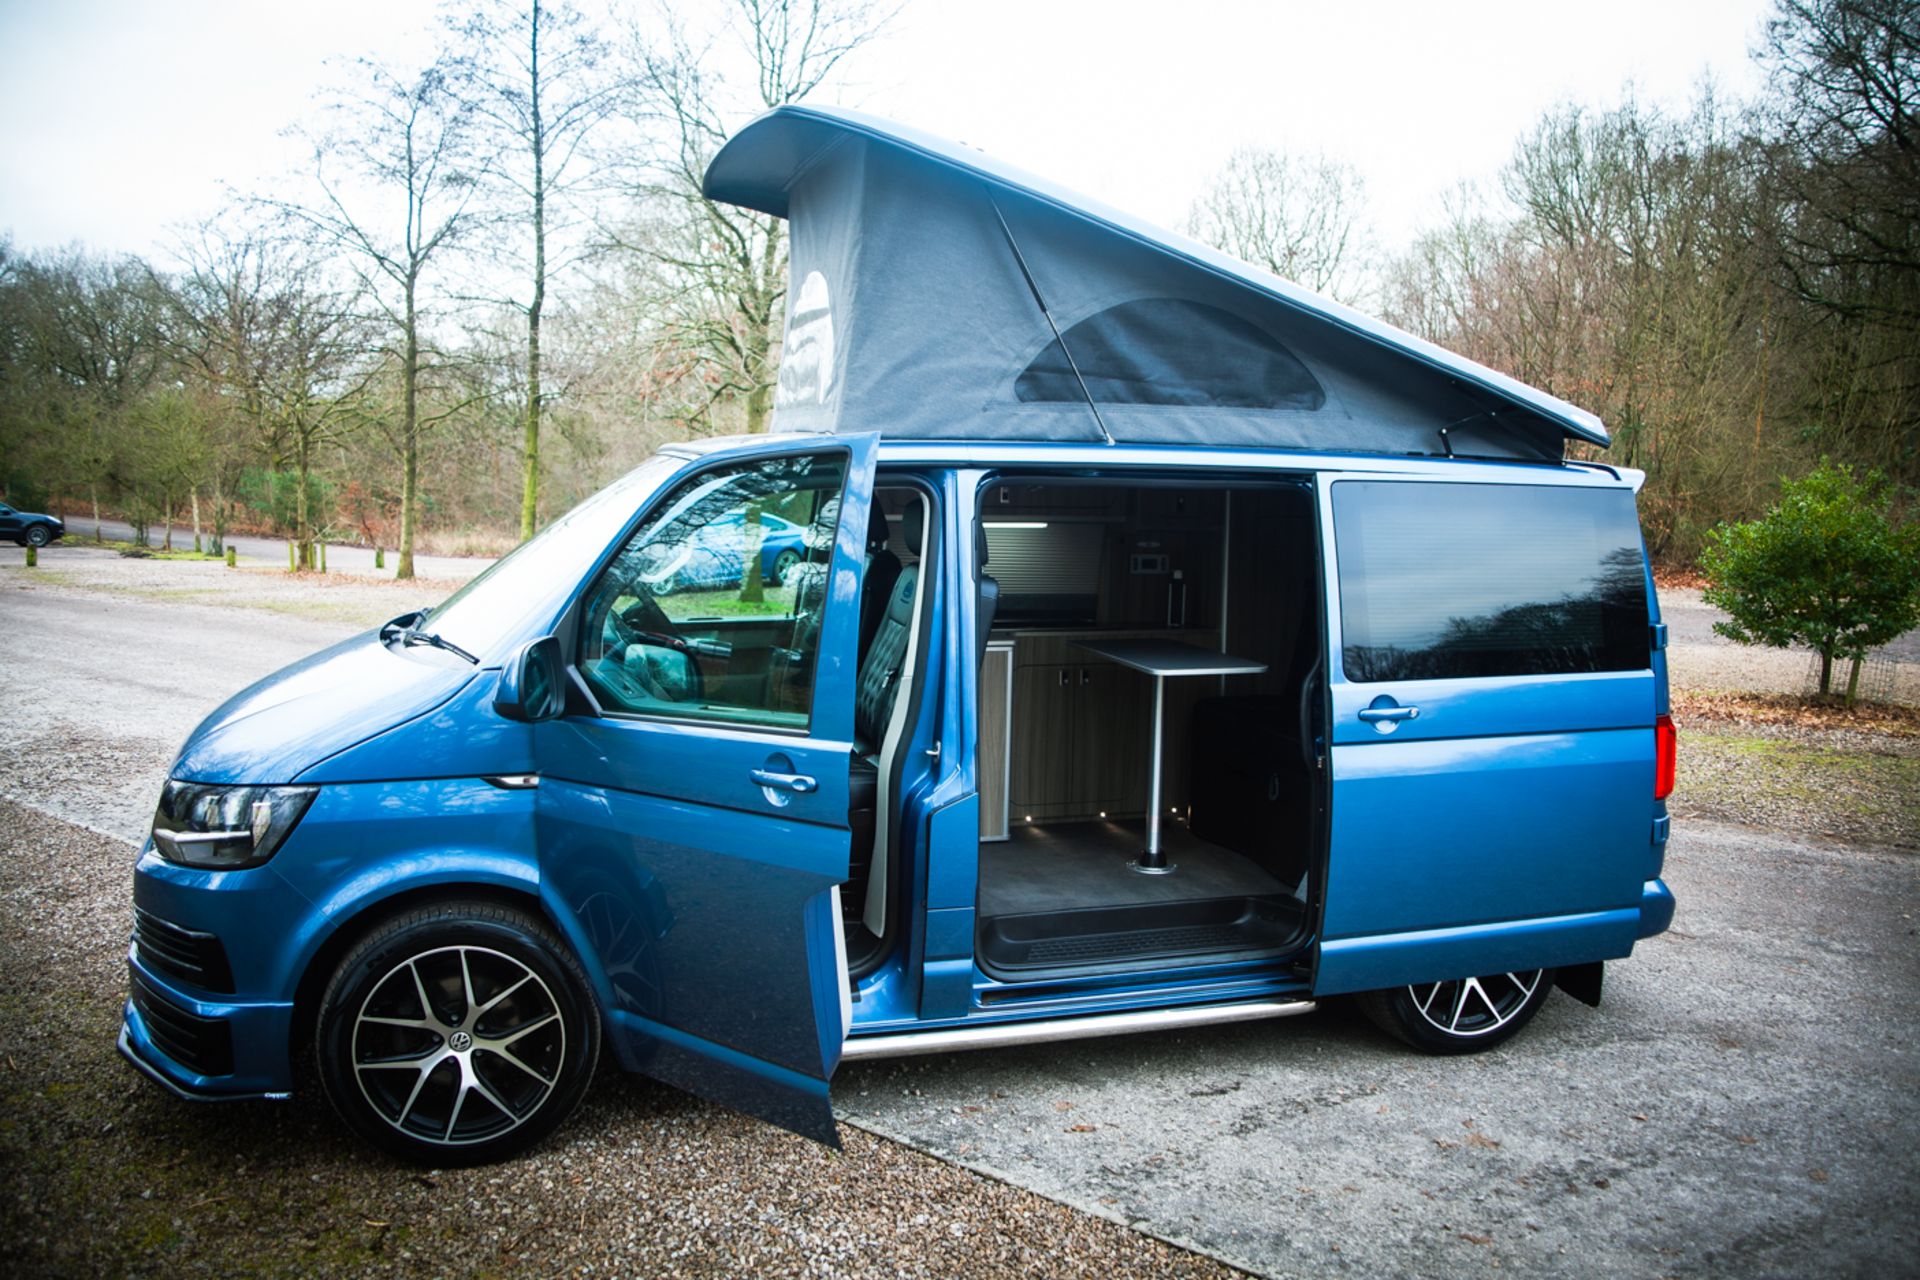 2016 Volkswagen Transporter With Full Unused Camper Conversion - Image 4 of 31